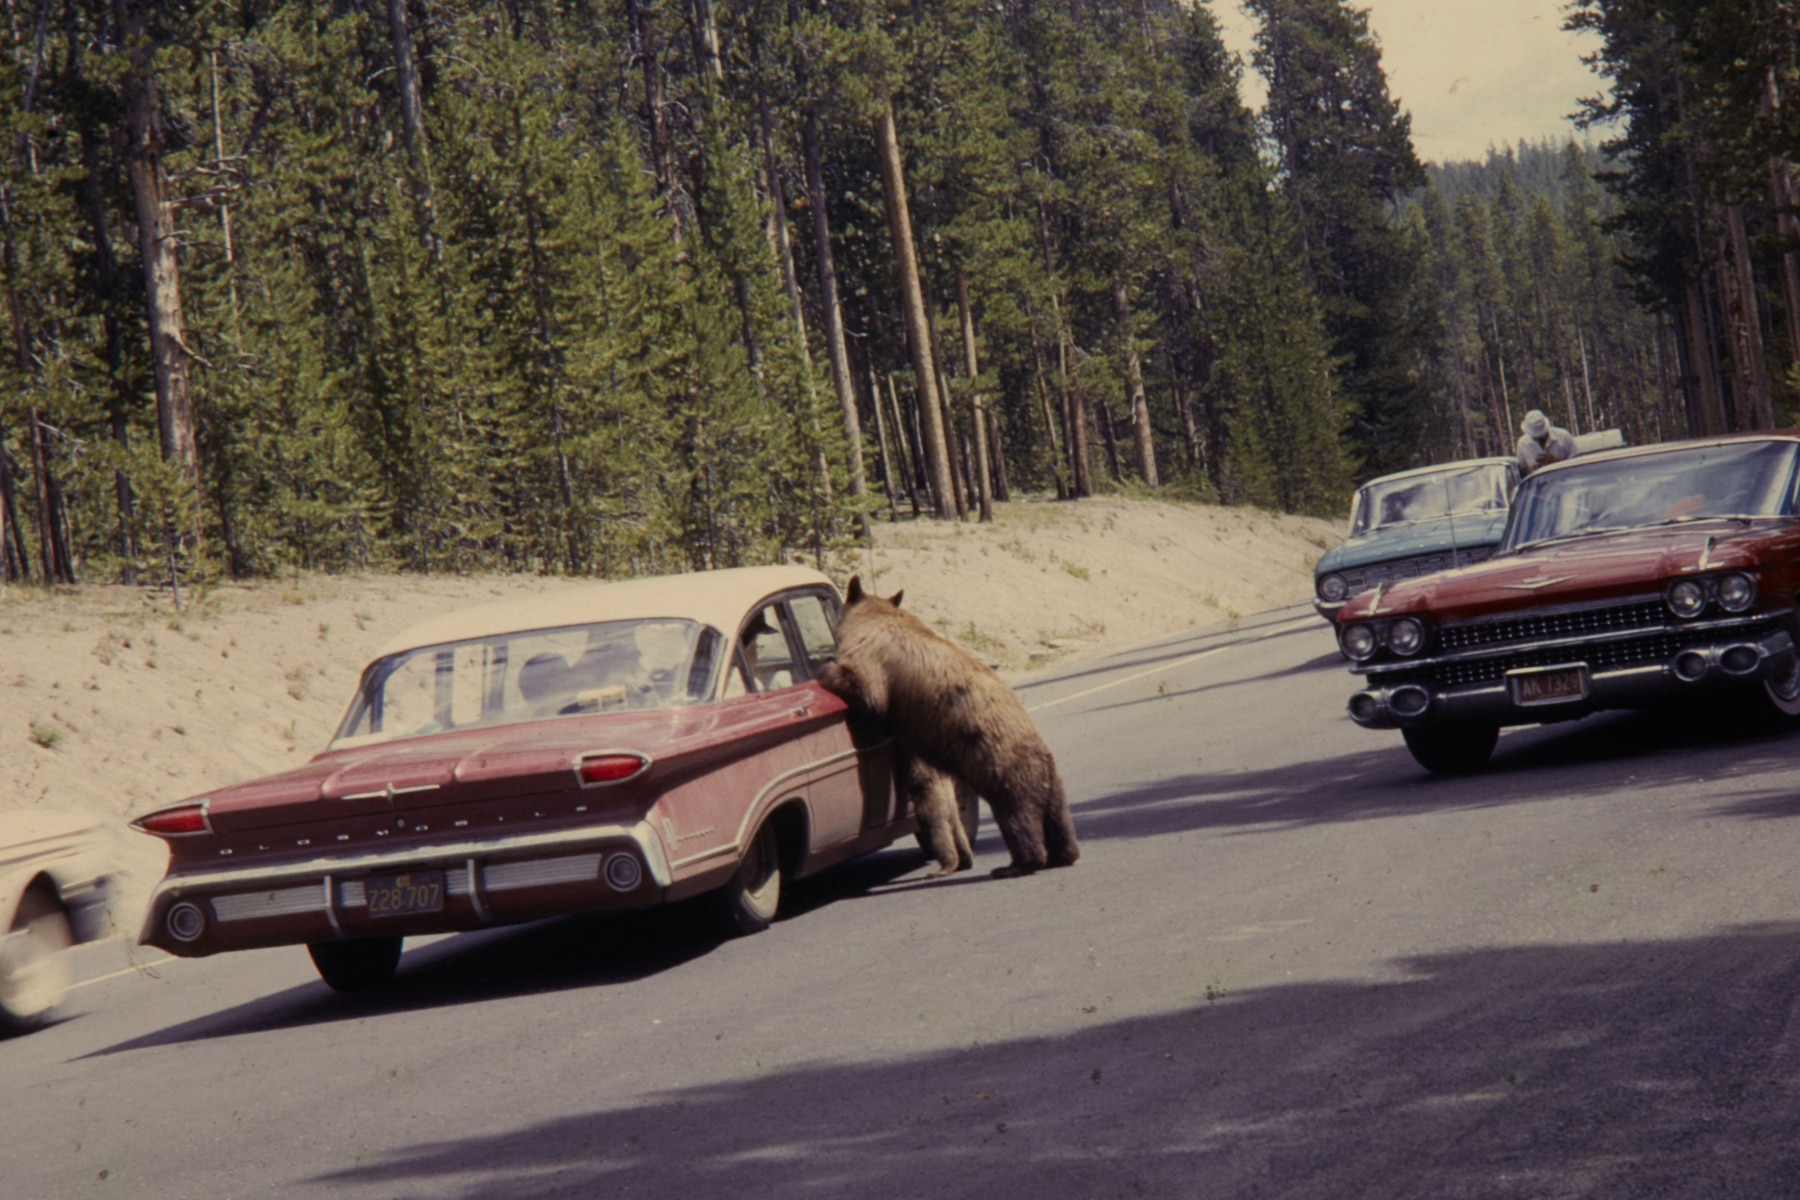 Bears fed from cars in Yellowstone in this historical photo circa 1960s.